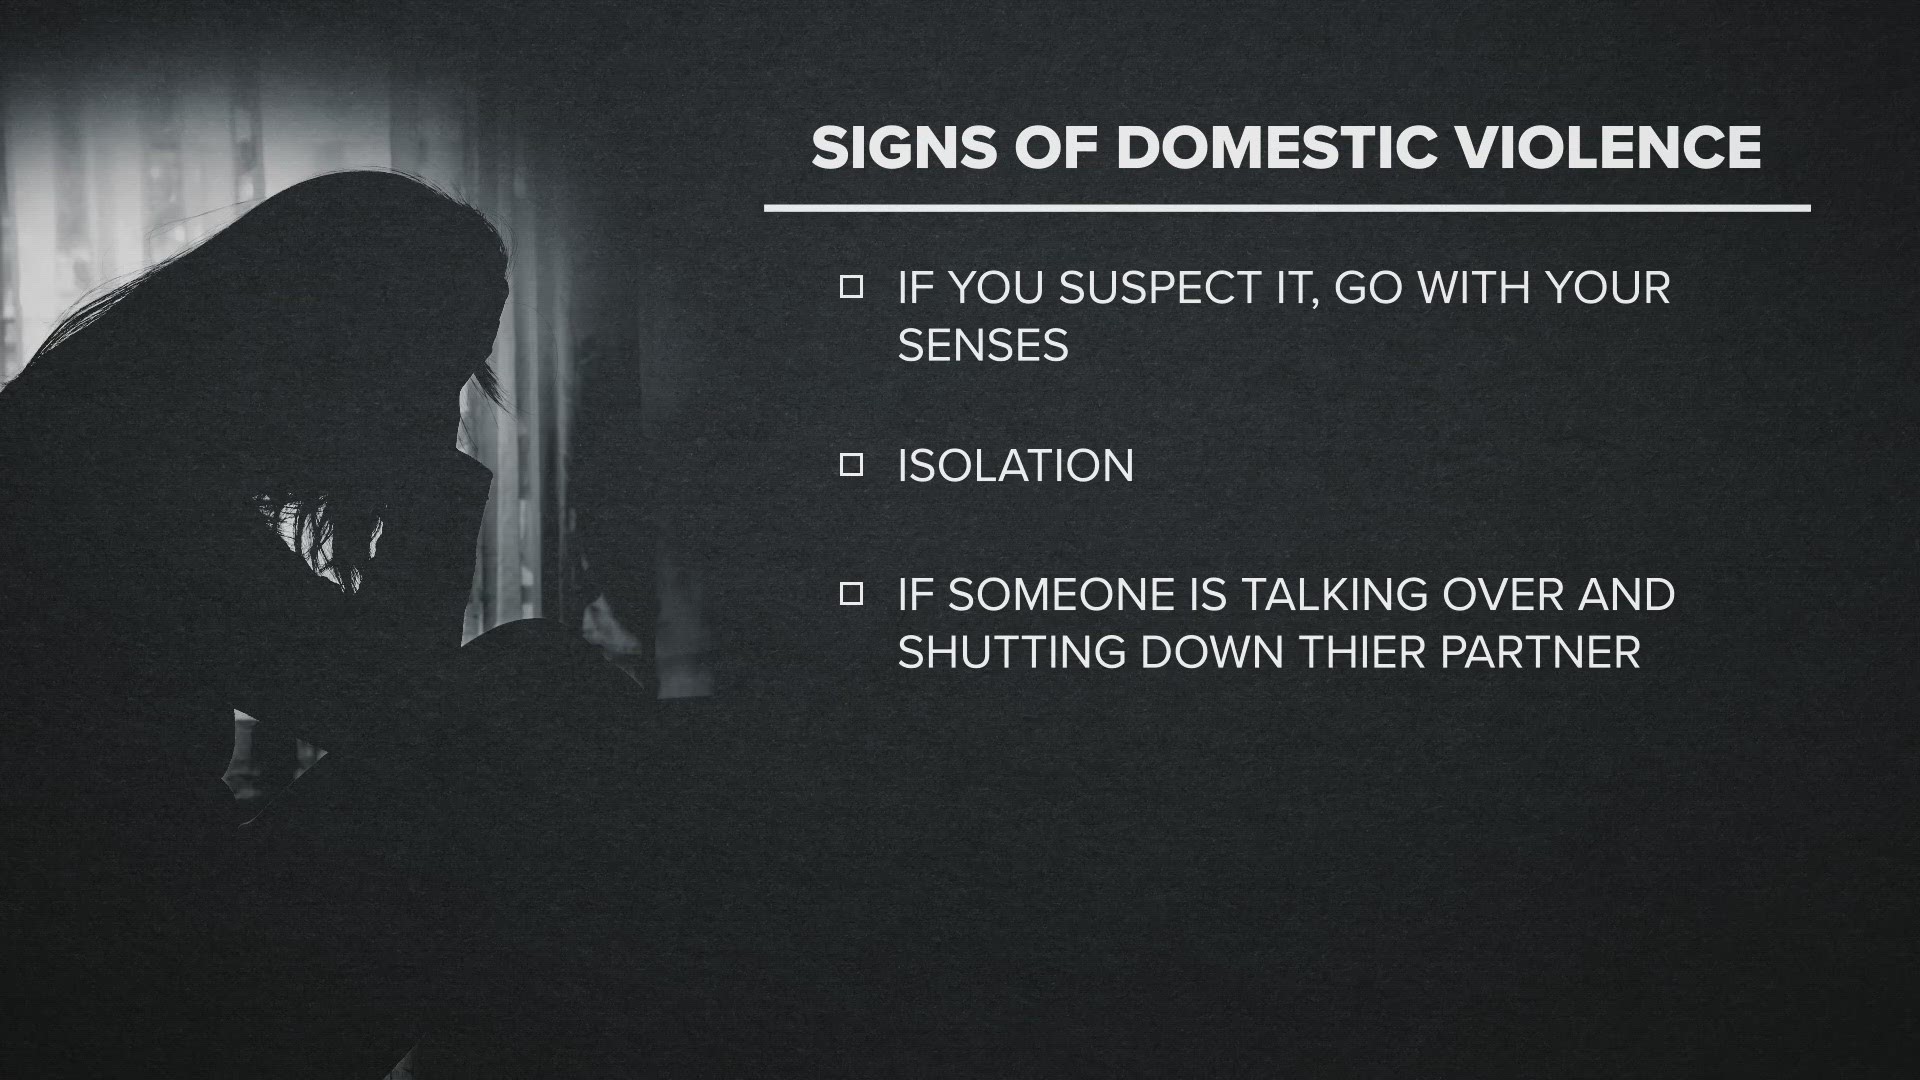 A third of women and a quarter of men in the nation have experienced some type of violence from an intimate partner.